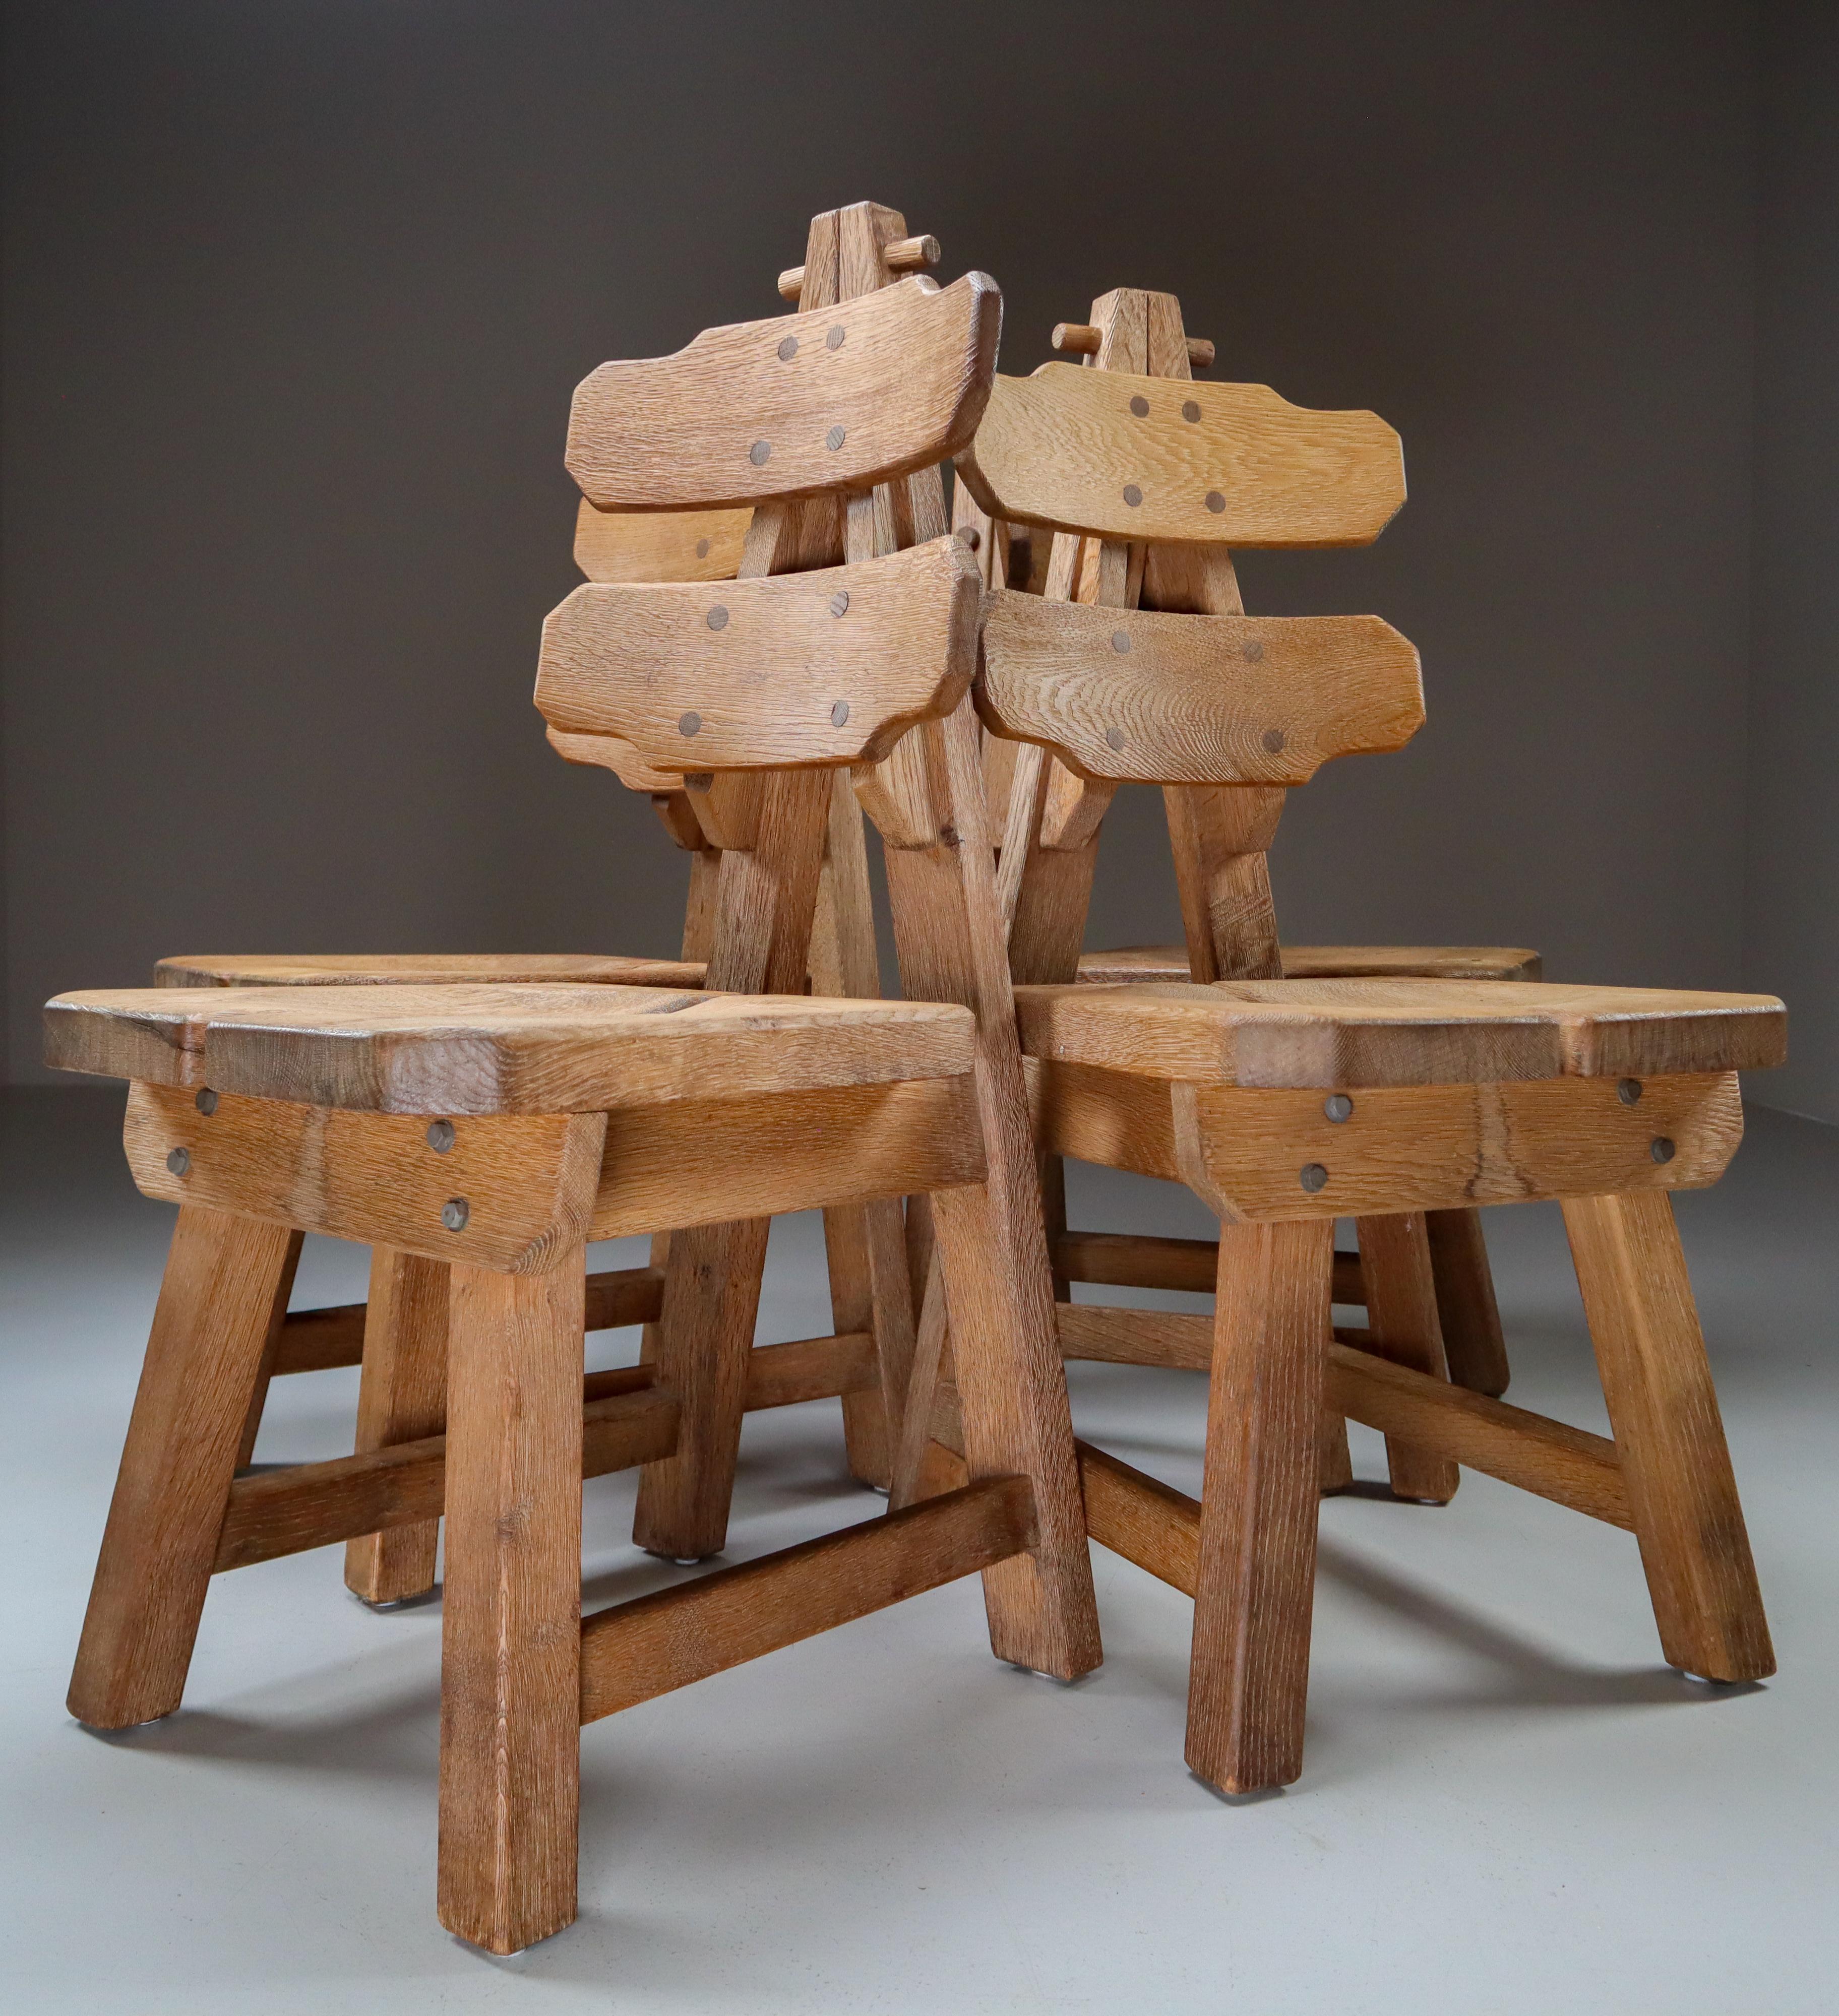 Set of four sculptural chairs in oak, France, 1960s

A robust set of four sculptural wooden dining chairs. These chairs are made of French oak and sculpturally crafted by hand. The craftsmanship is still visible, they are made of solid oak wood